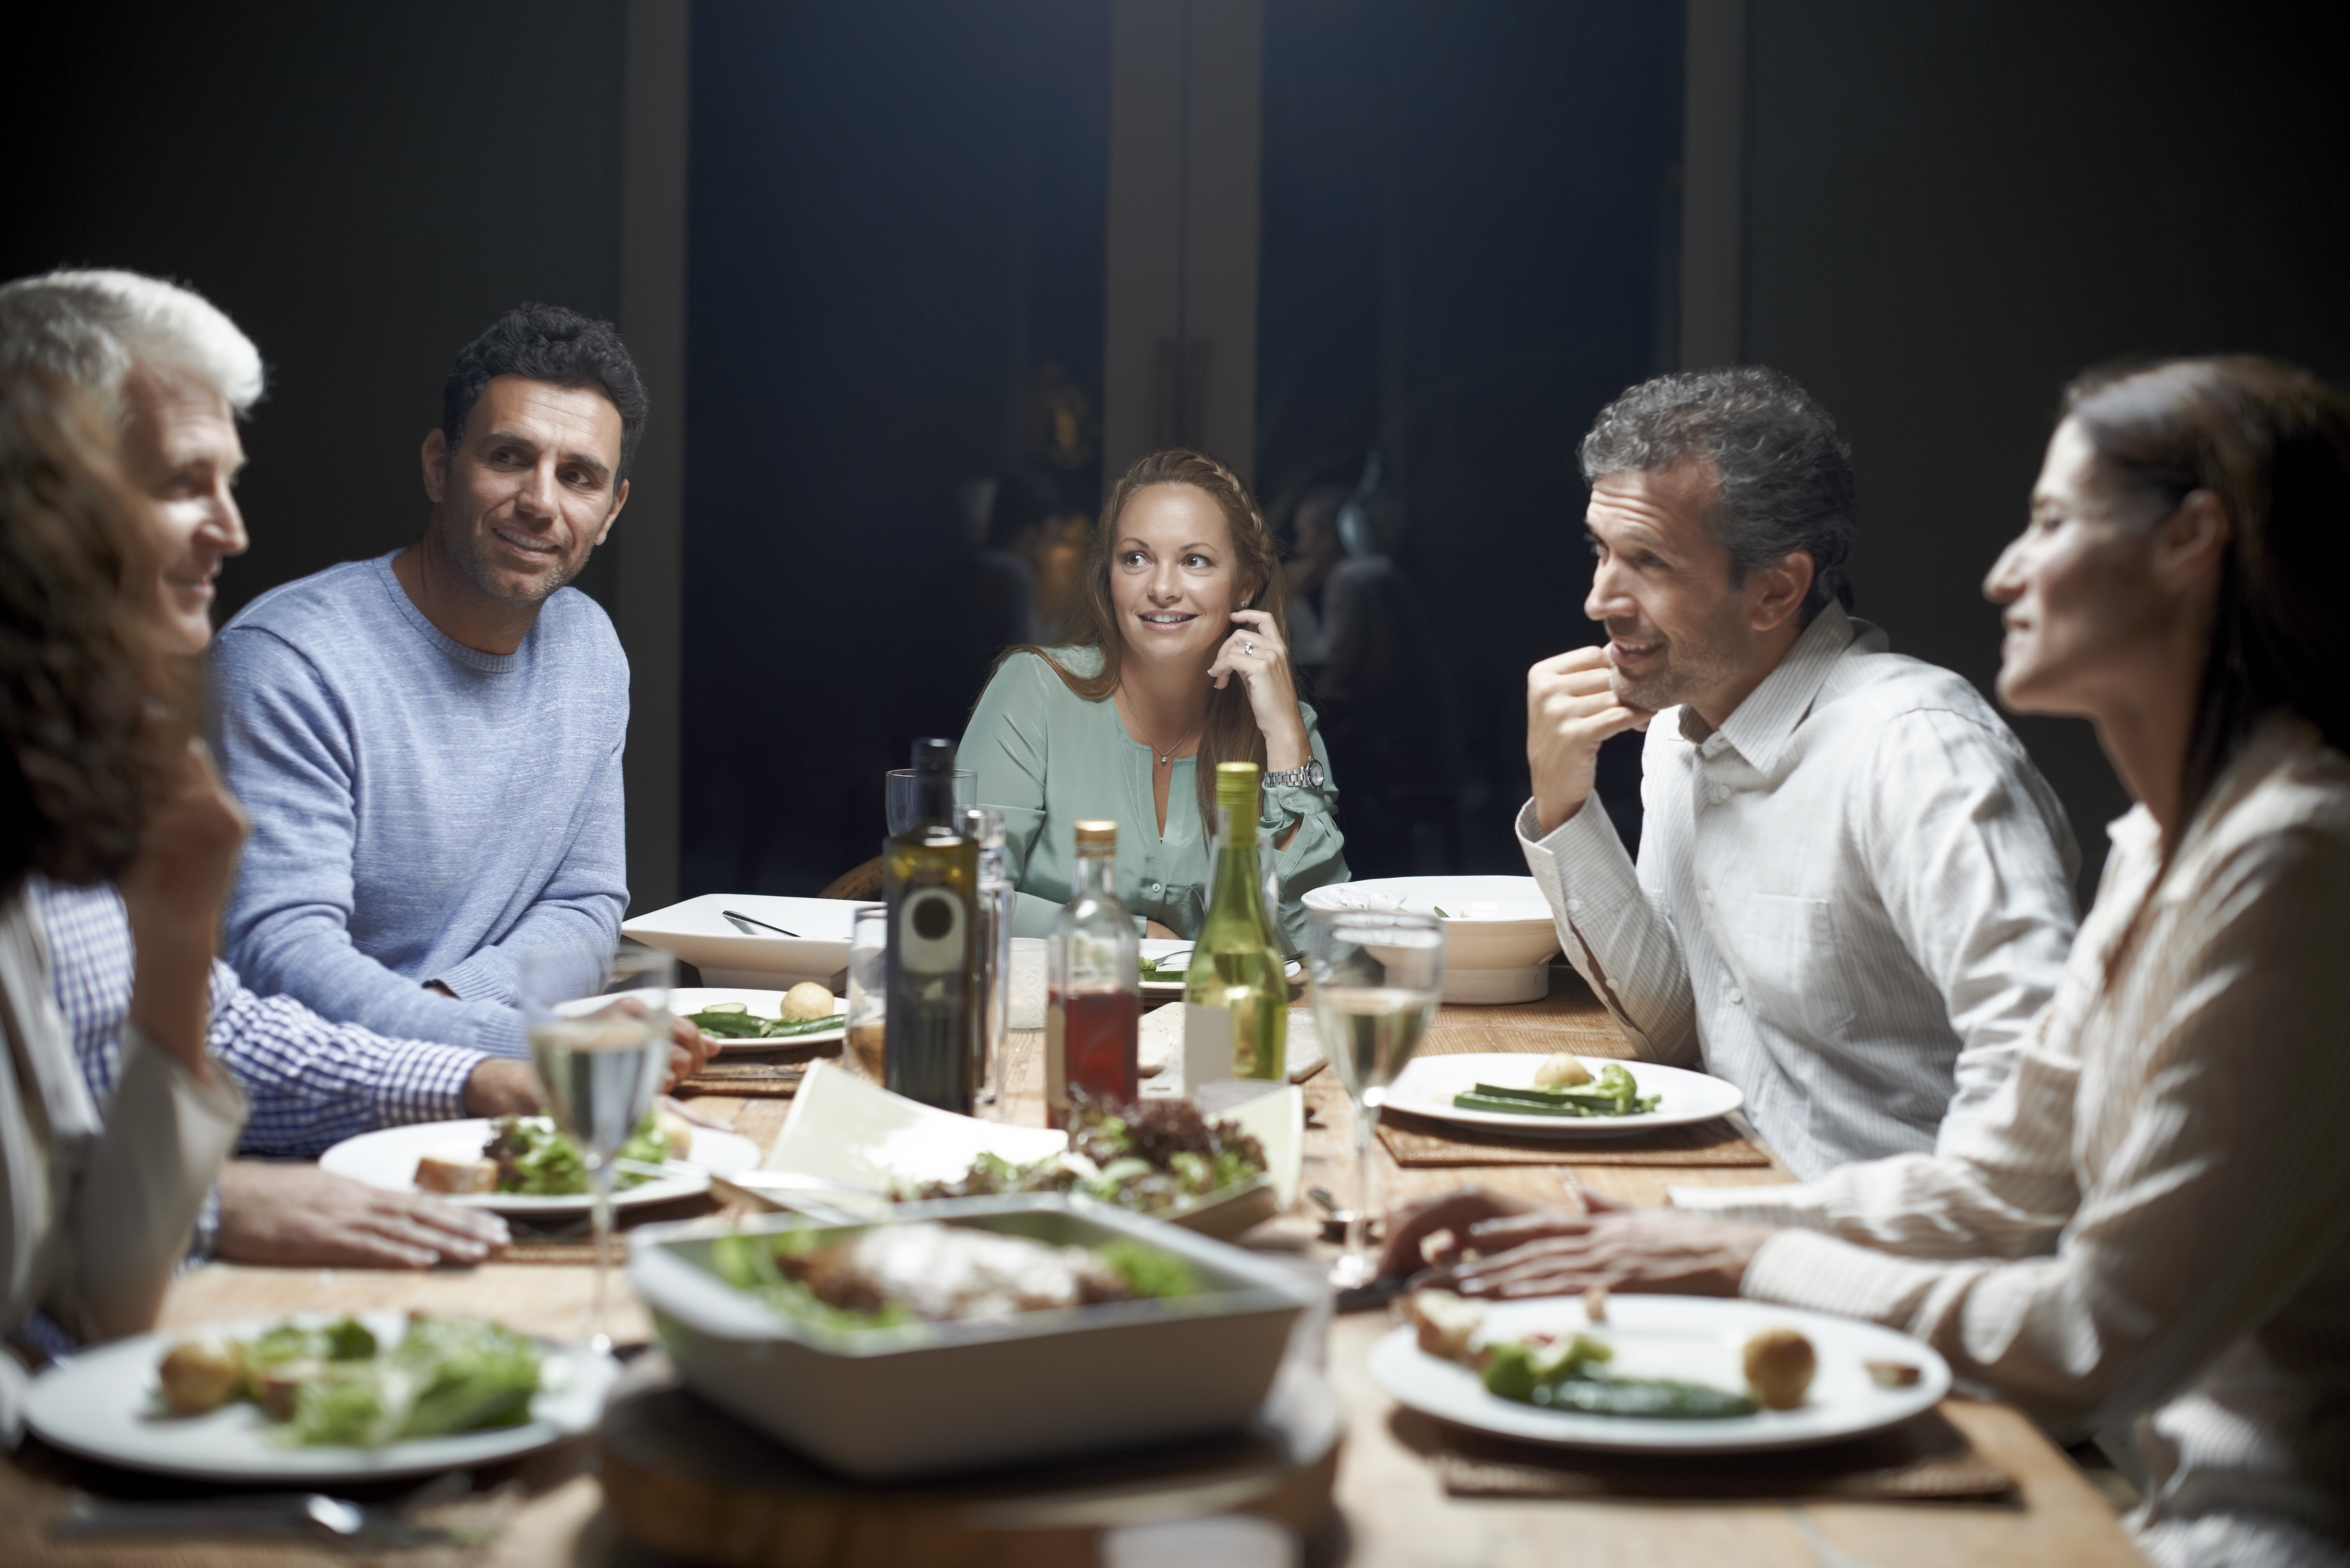 Friends communicating while having dinner at table | Source: Getty Images